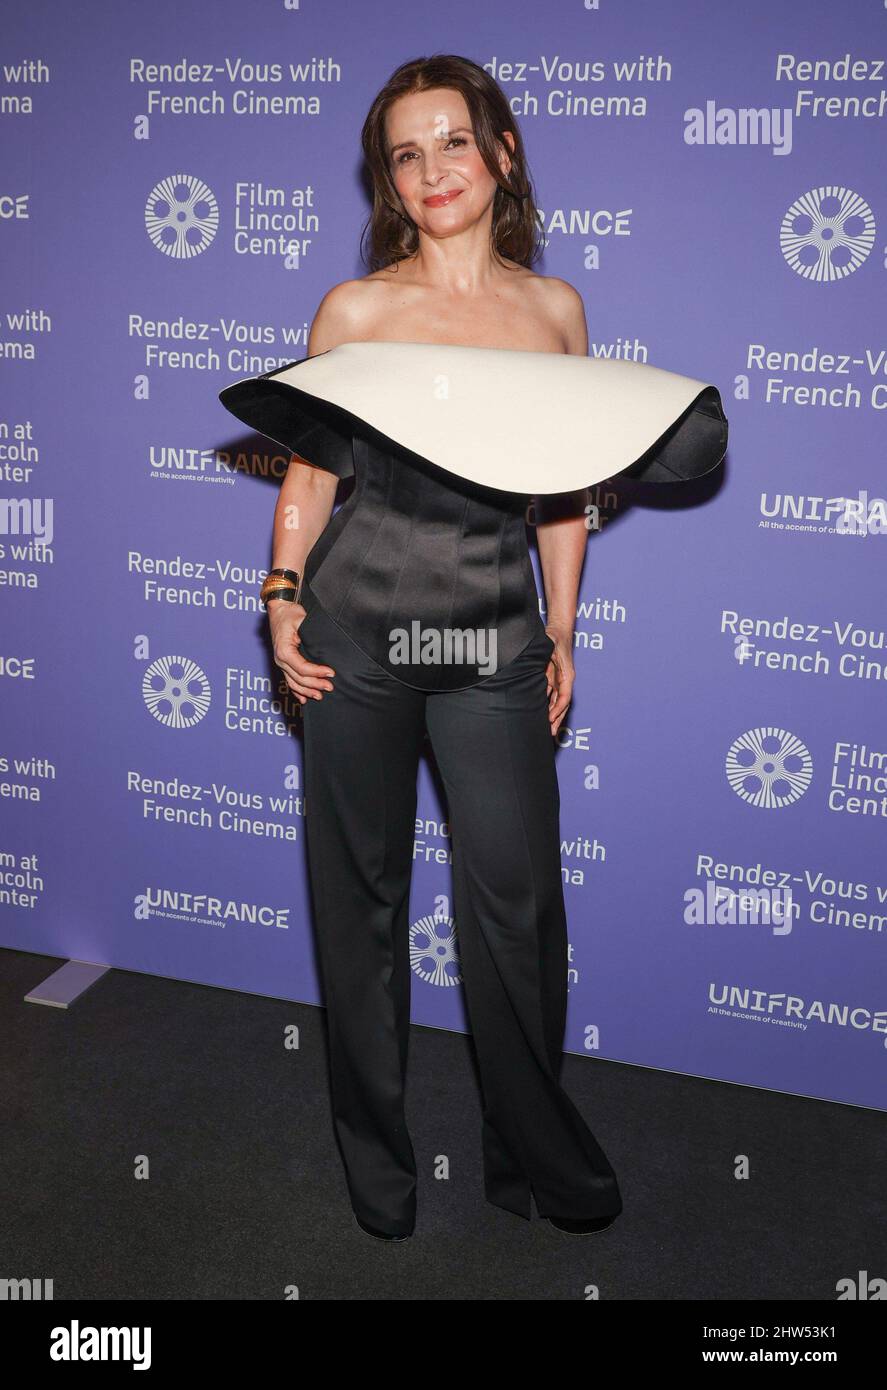 New York, NY, USA. 3rd Mar, 2022. Juliette Binoche at arrivals for Rendez-Vous With French Cinema's Opening Night with Claire Denis's FIRE, Film at Lincoln Center - Walter Reade Theater, New York, NY March 3, 2022. Credit: CJ Rivera/Everett Collection/Alamy Live News Stock Photo